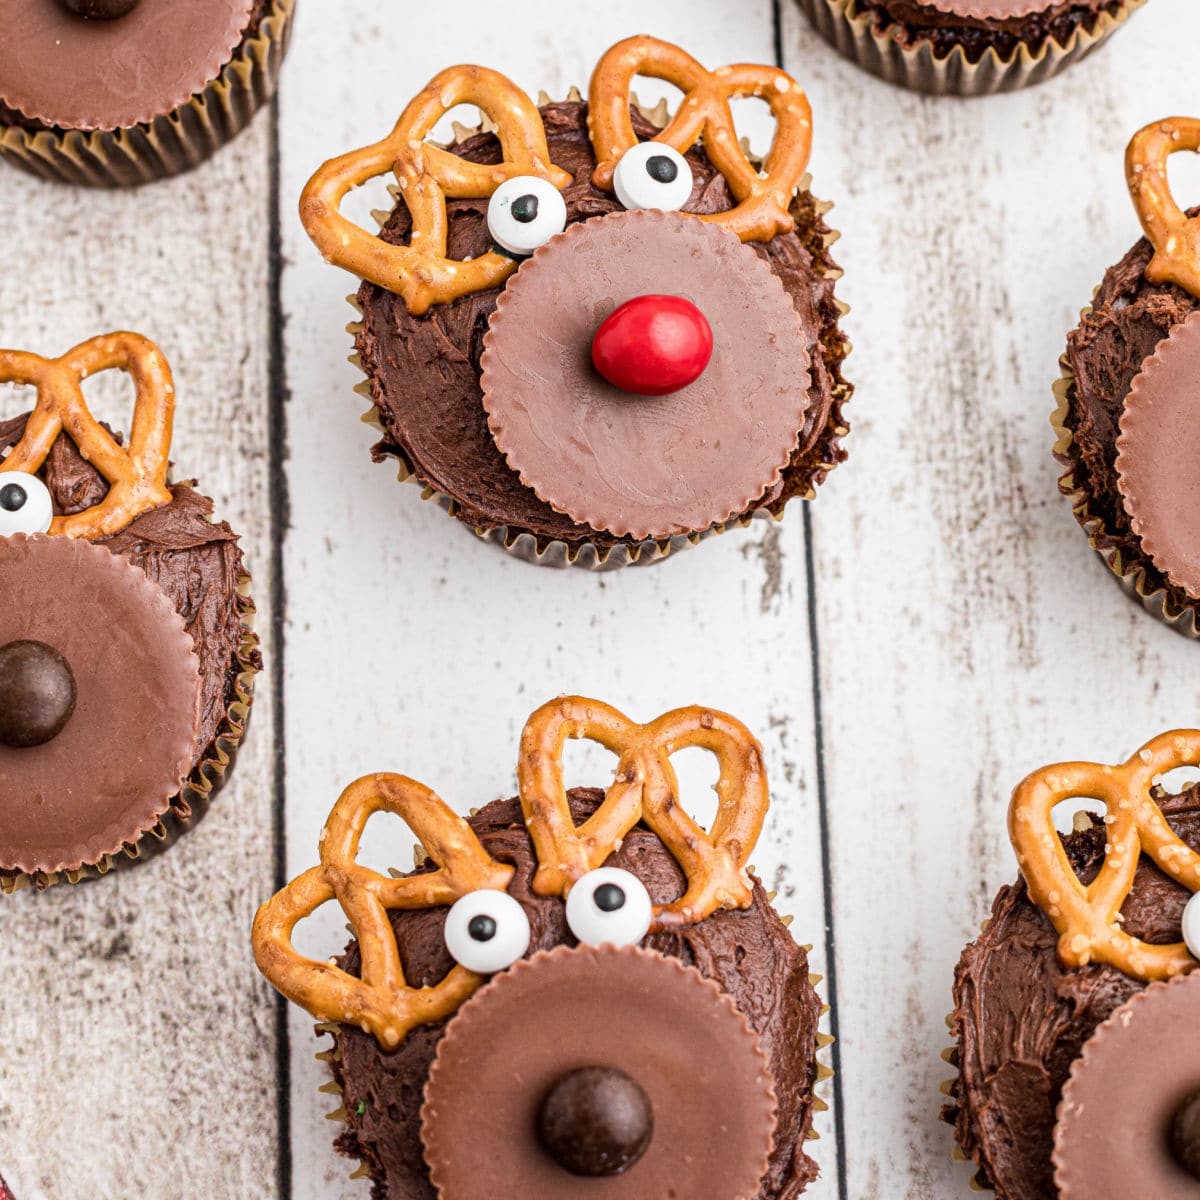 Reese's Cup Rudolph Treats - The Soccer Mom Blog